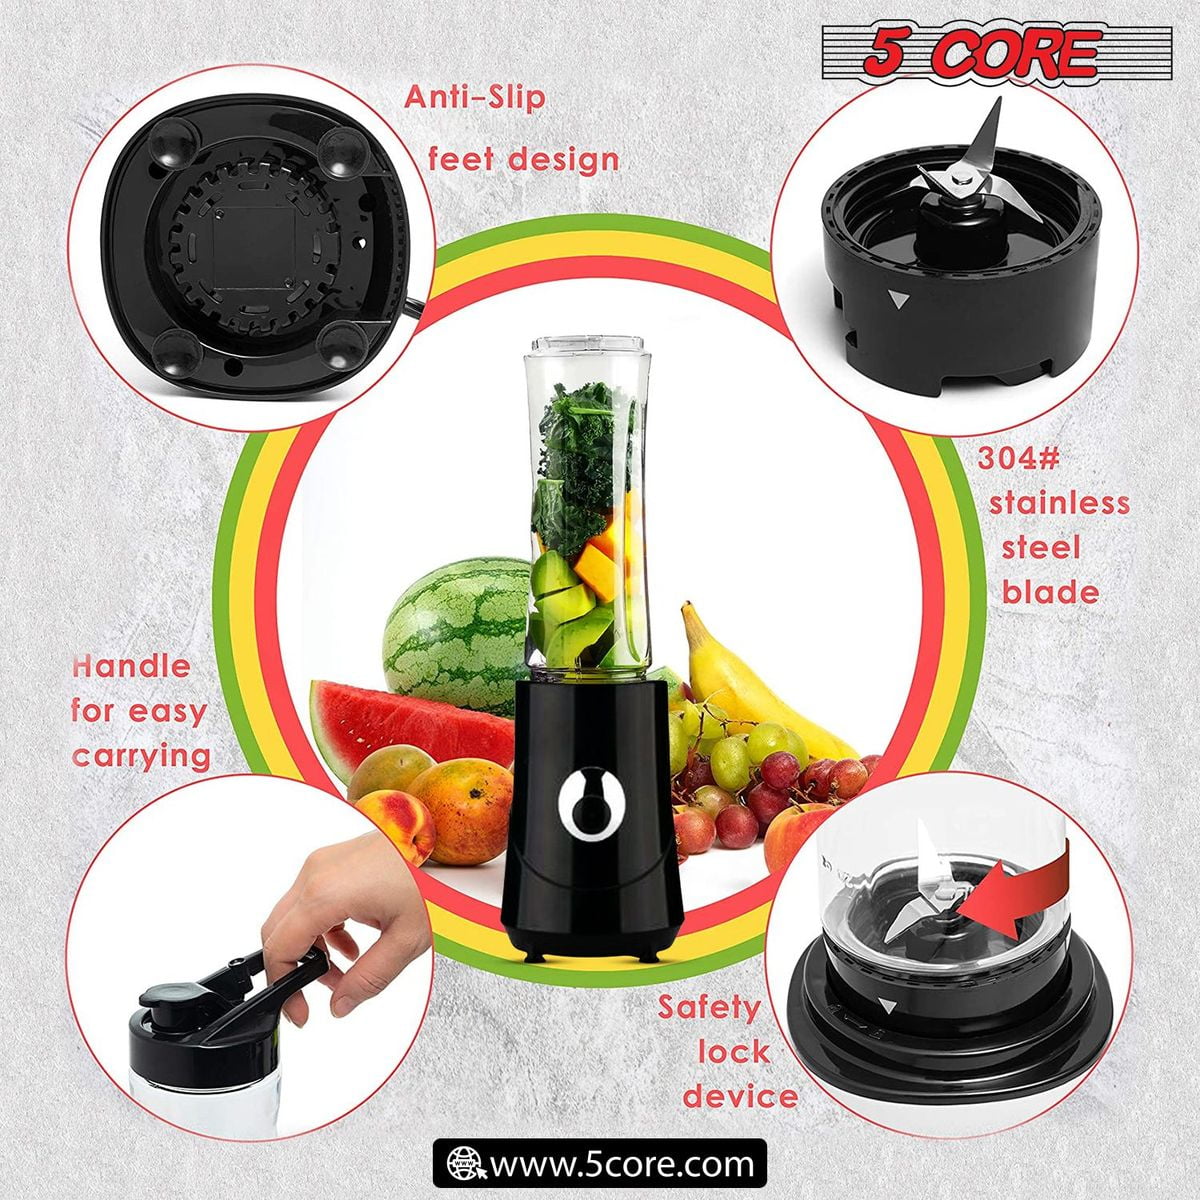 5 Core 600ml Personal Blender for Shakes and Smoothies; Powerful &  Professional Smoothie Maker with Portable Bottle 300W Electric Motor BPA  Free Food Processor 20 Oz 4 Stainless Steel Blade 5C 521 